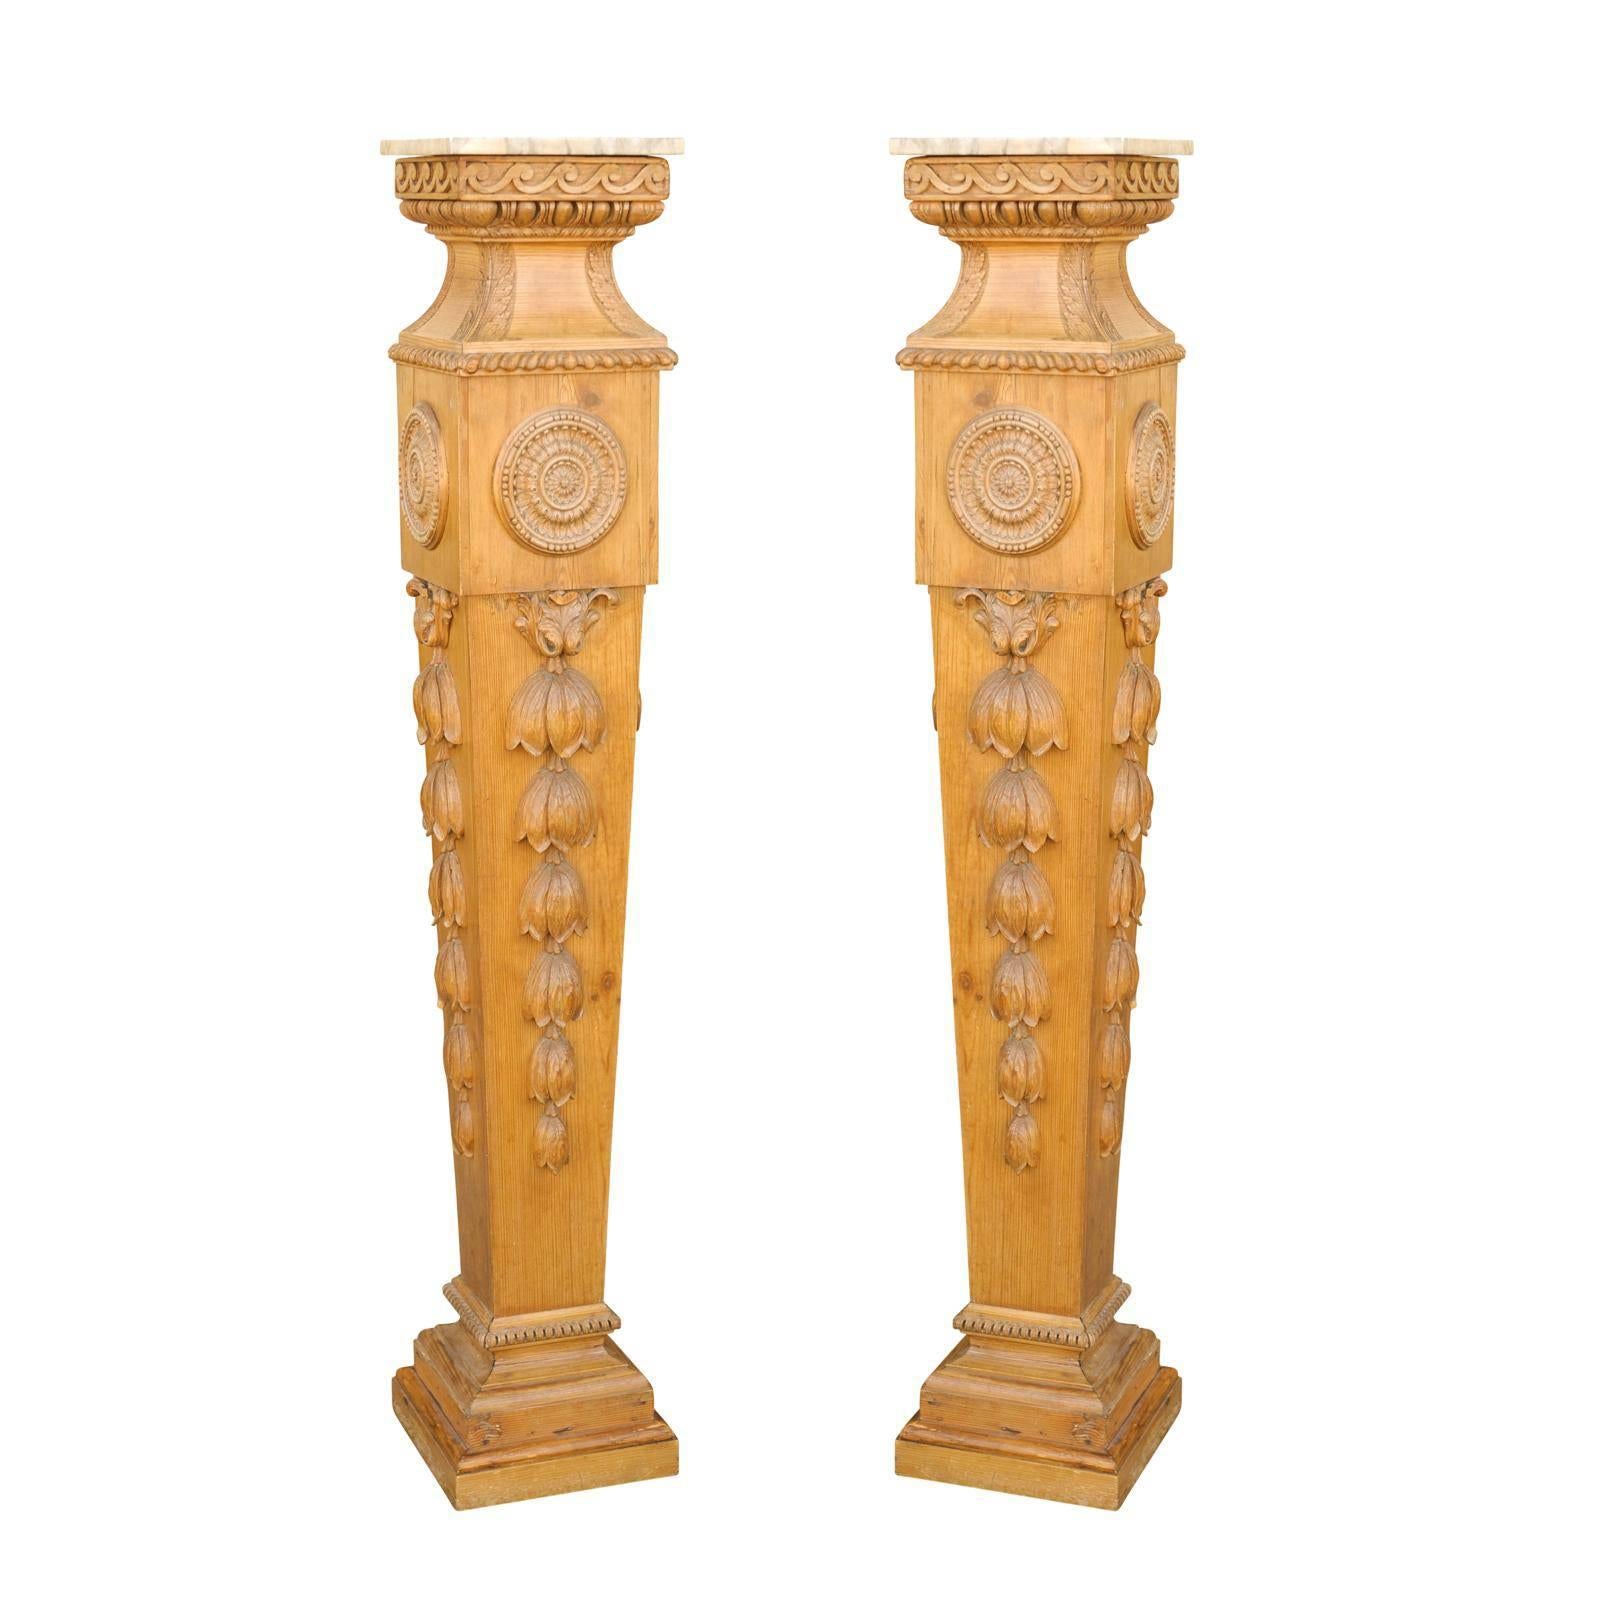 Pair of Tall English Mid-19th Century Carved Pedestals with Marble Top